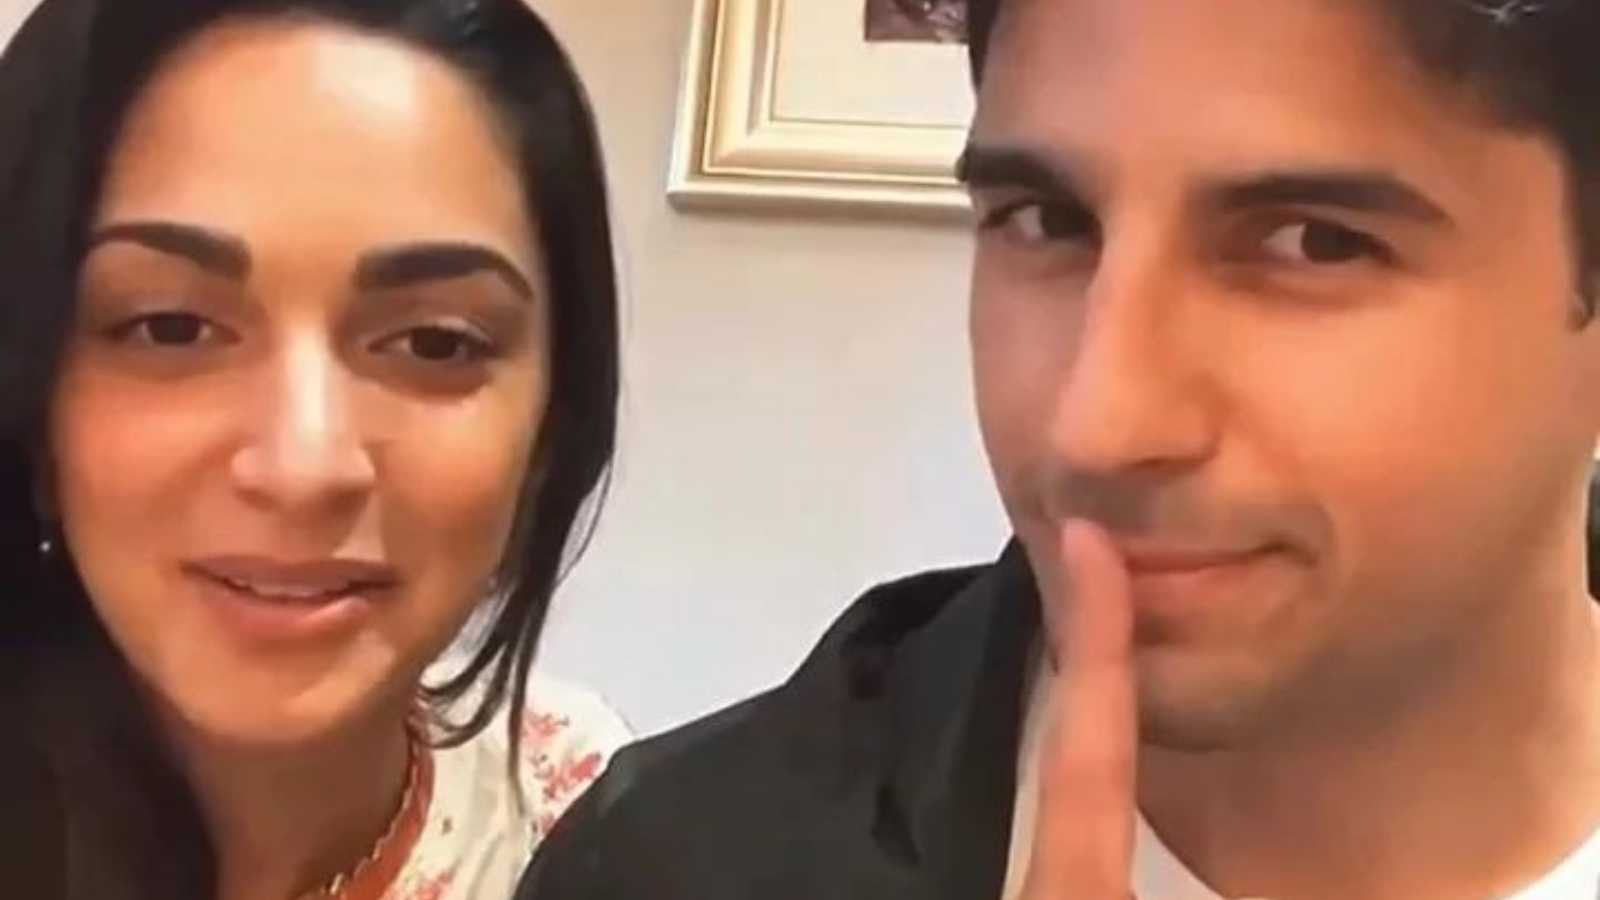 What are Sidharth Malhotra and Kiara Advani hiding? No, we're not talking about their apparent romance!